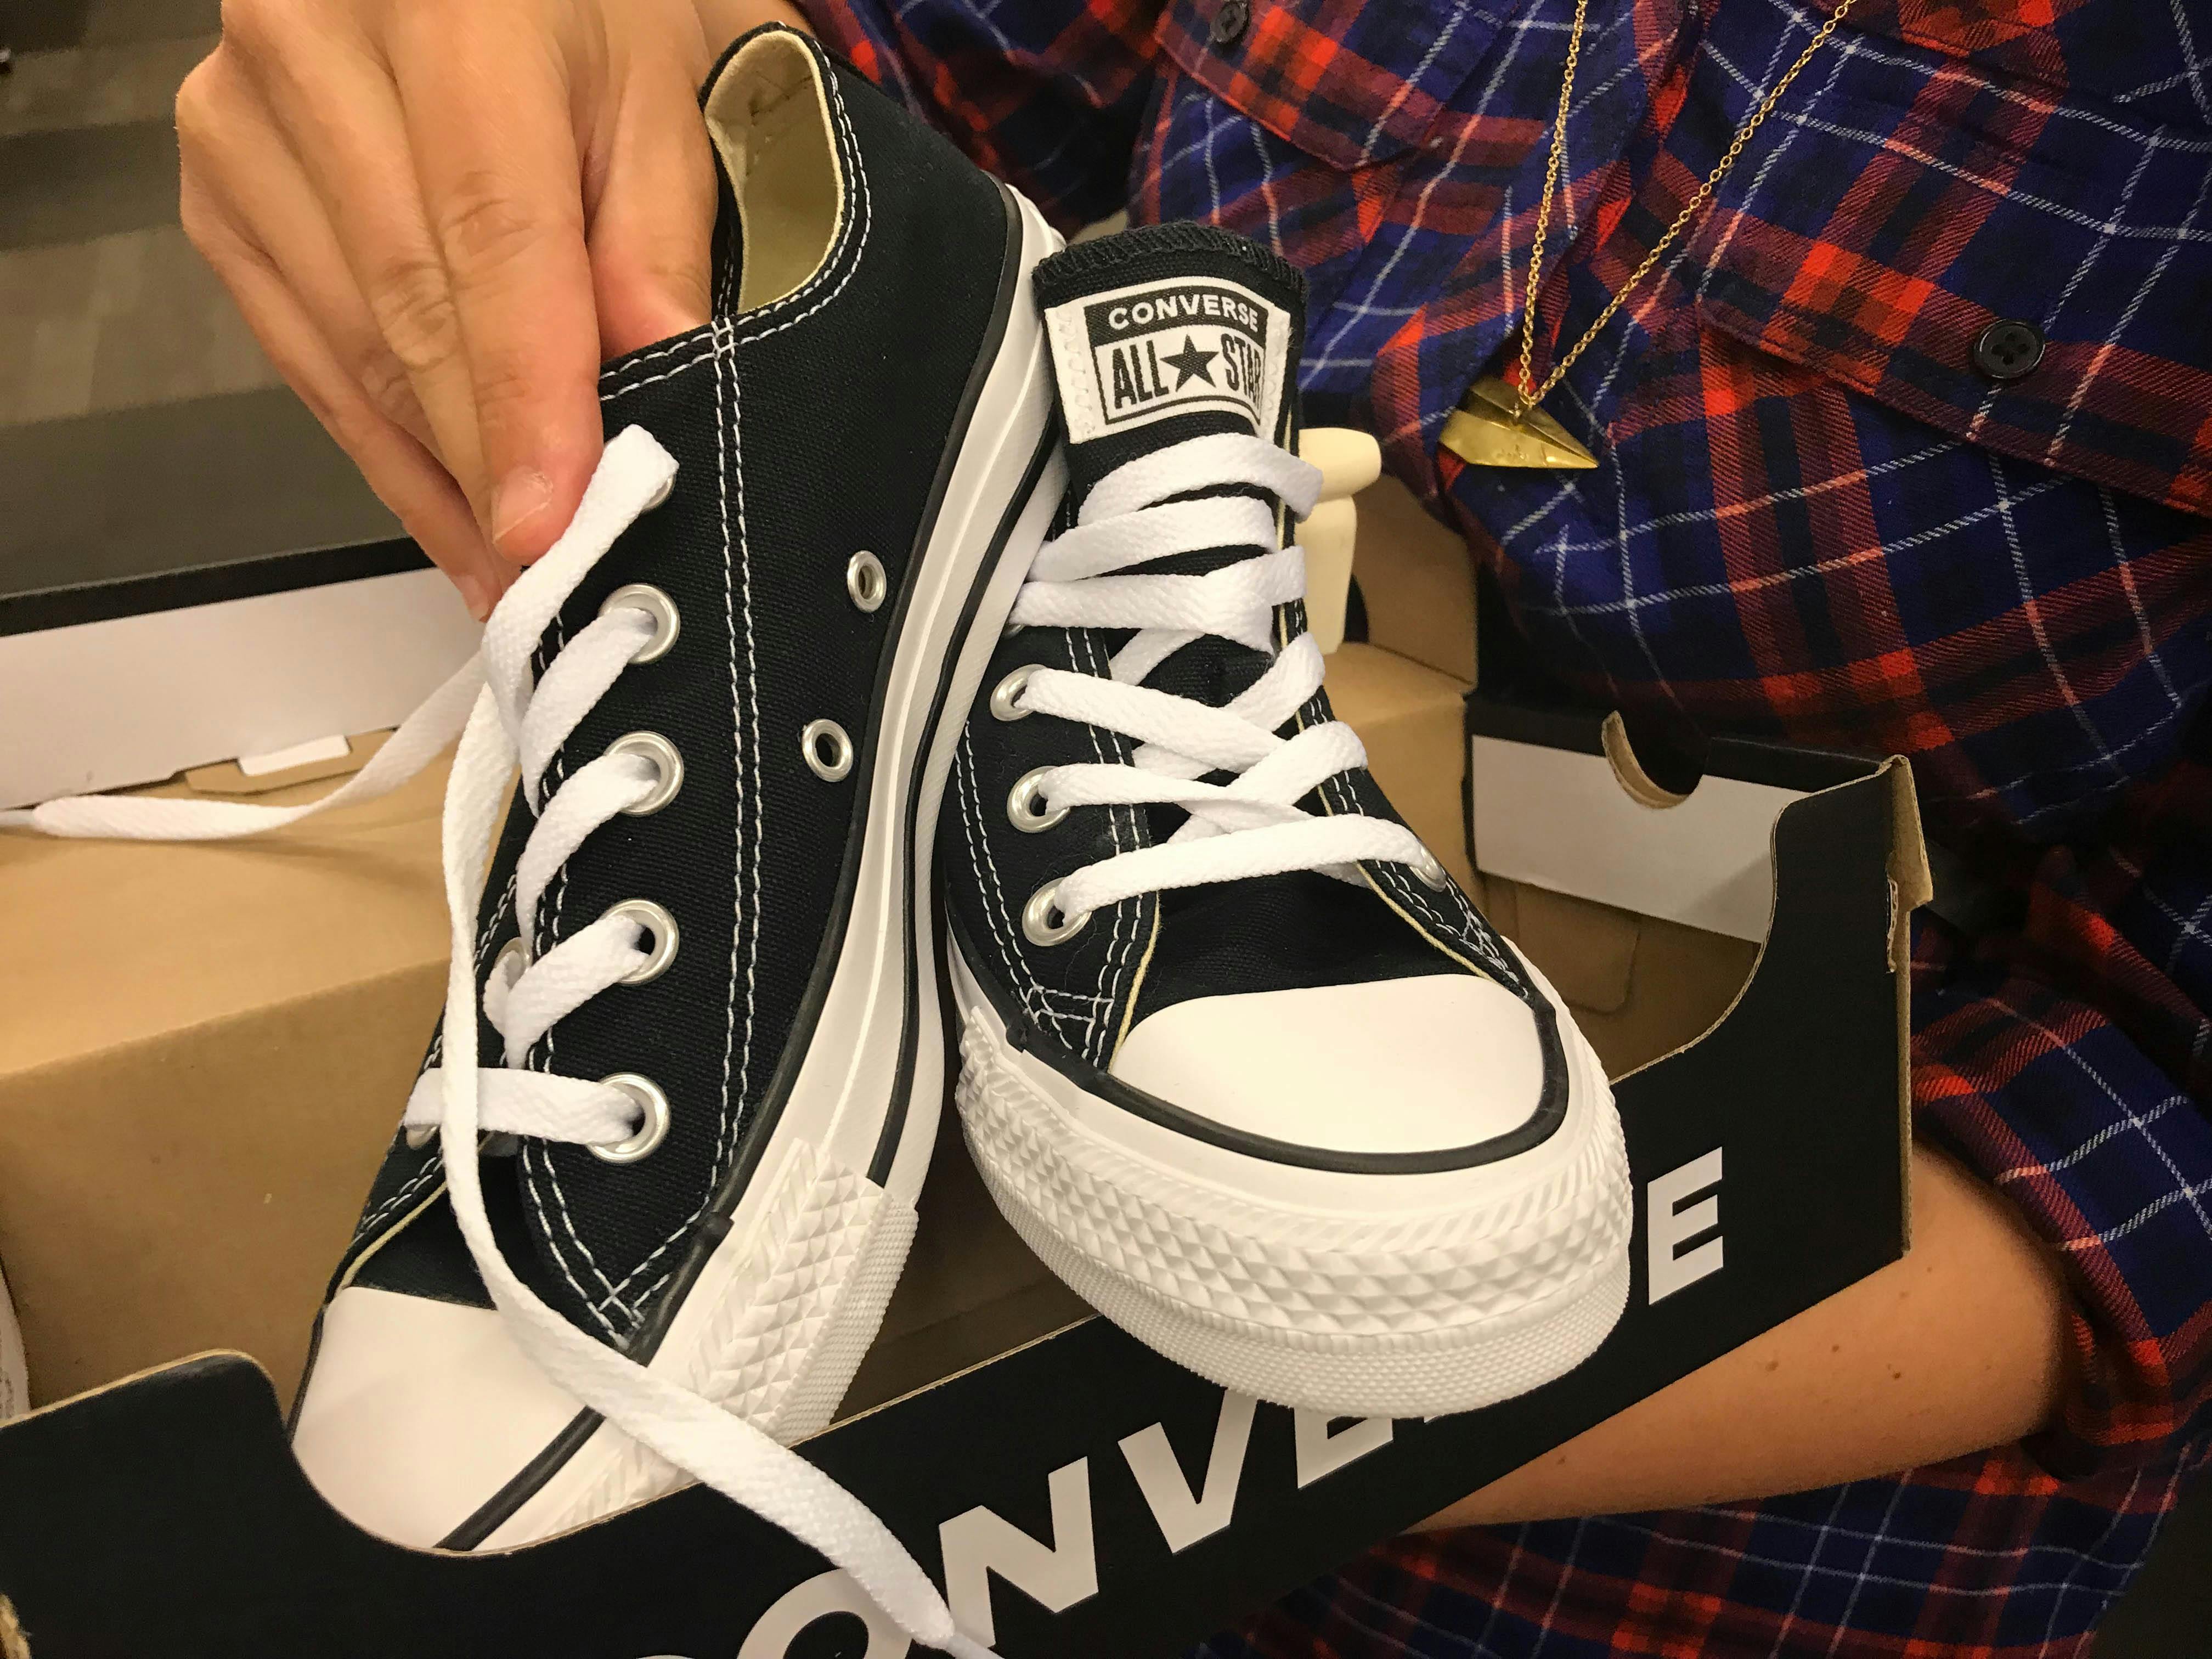 15 Converse Sales Tips and Tricks To Get All The Deals - The Krazy Lady